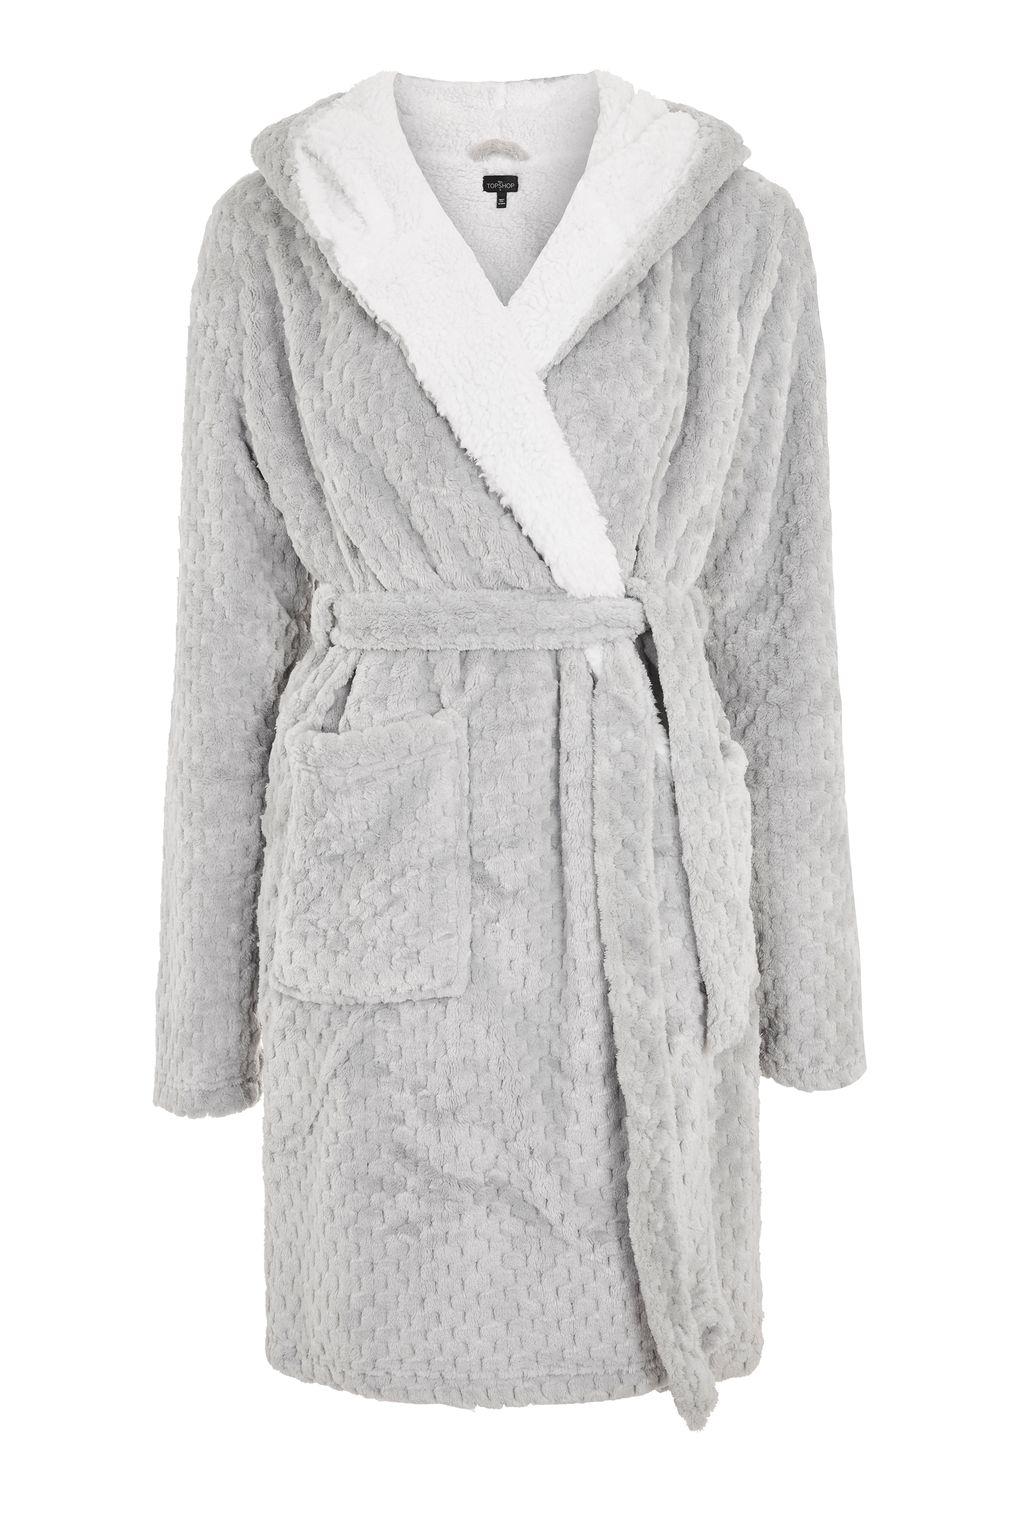 grey dressing gown topshop